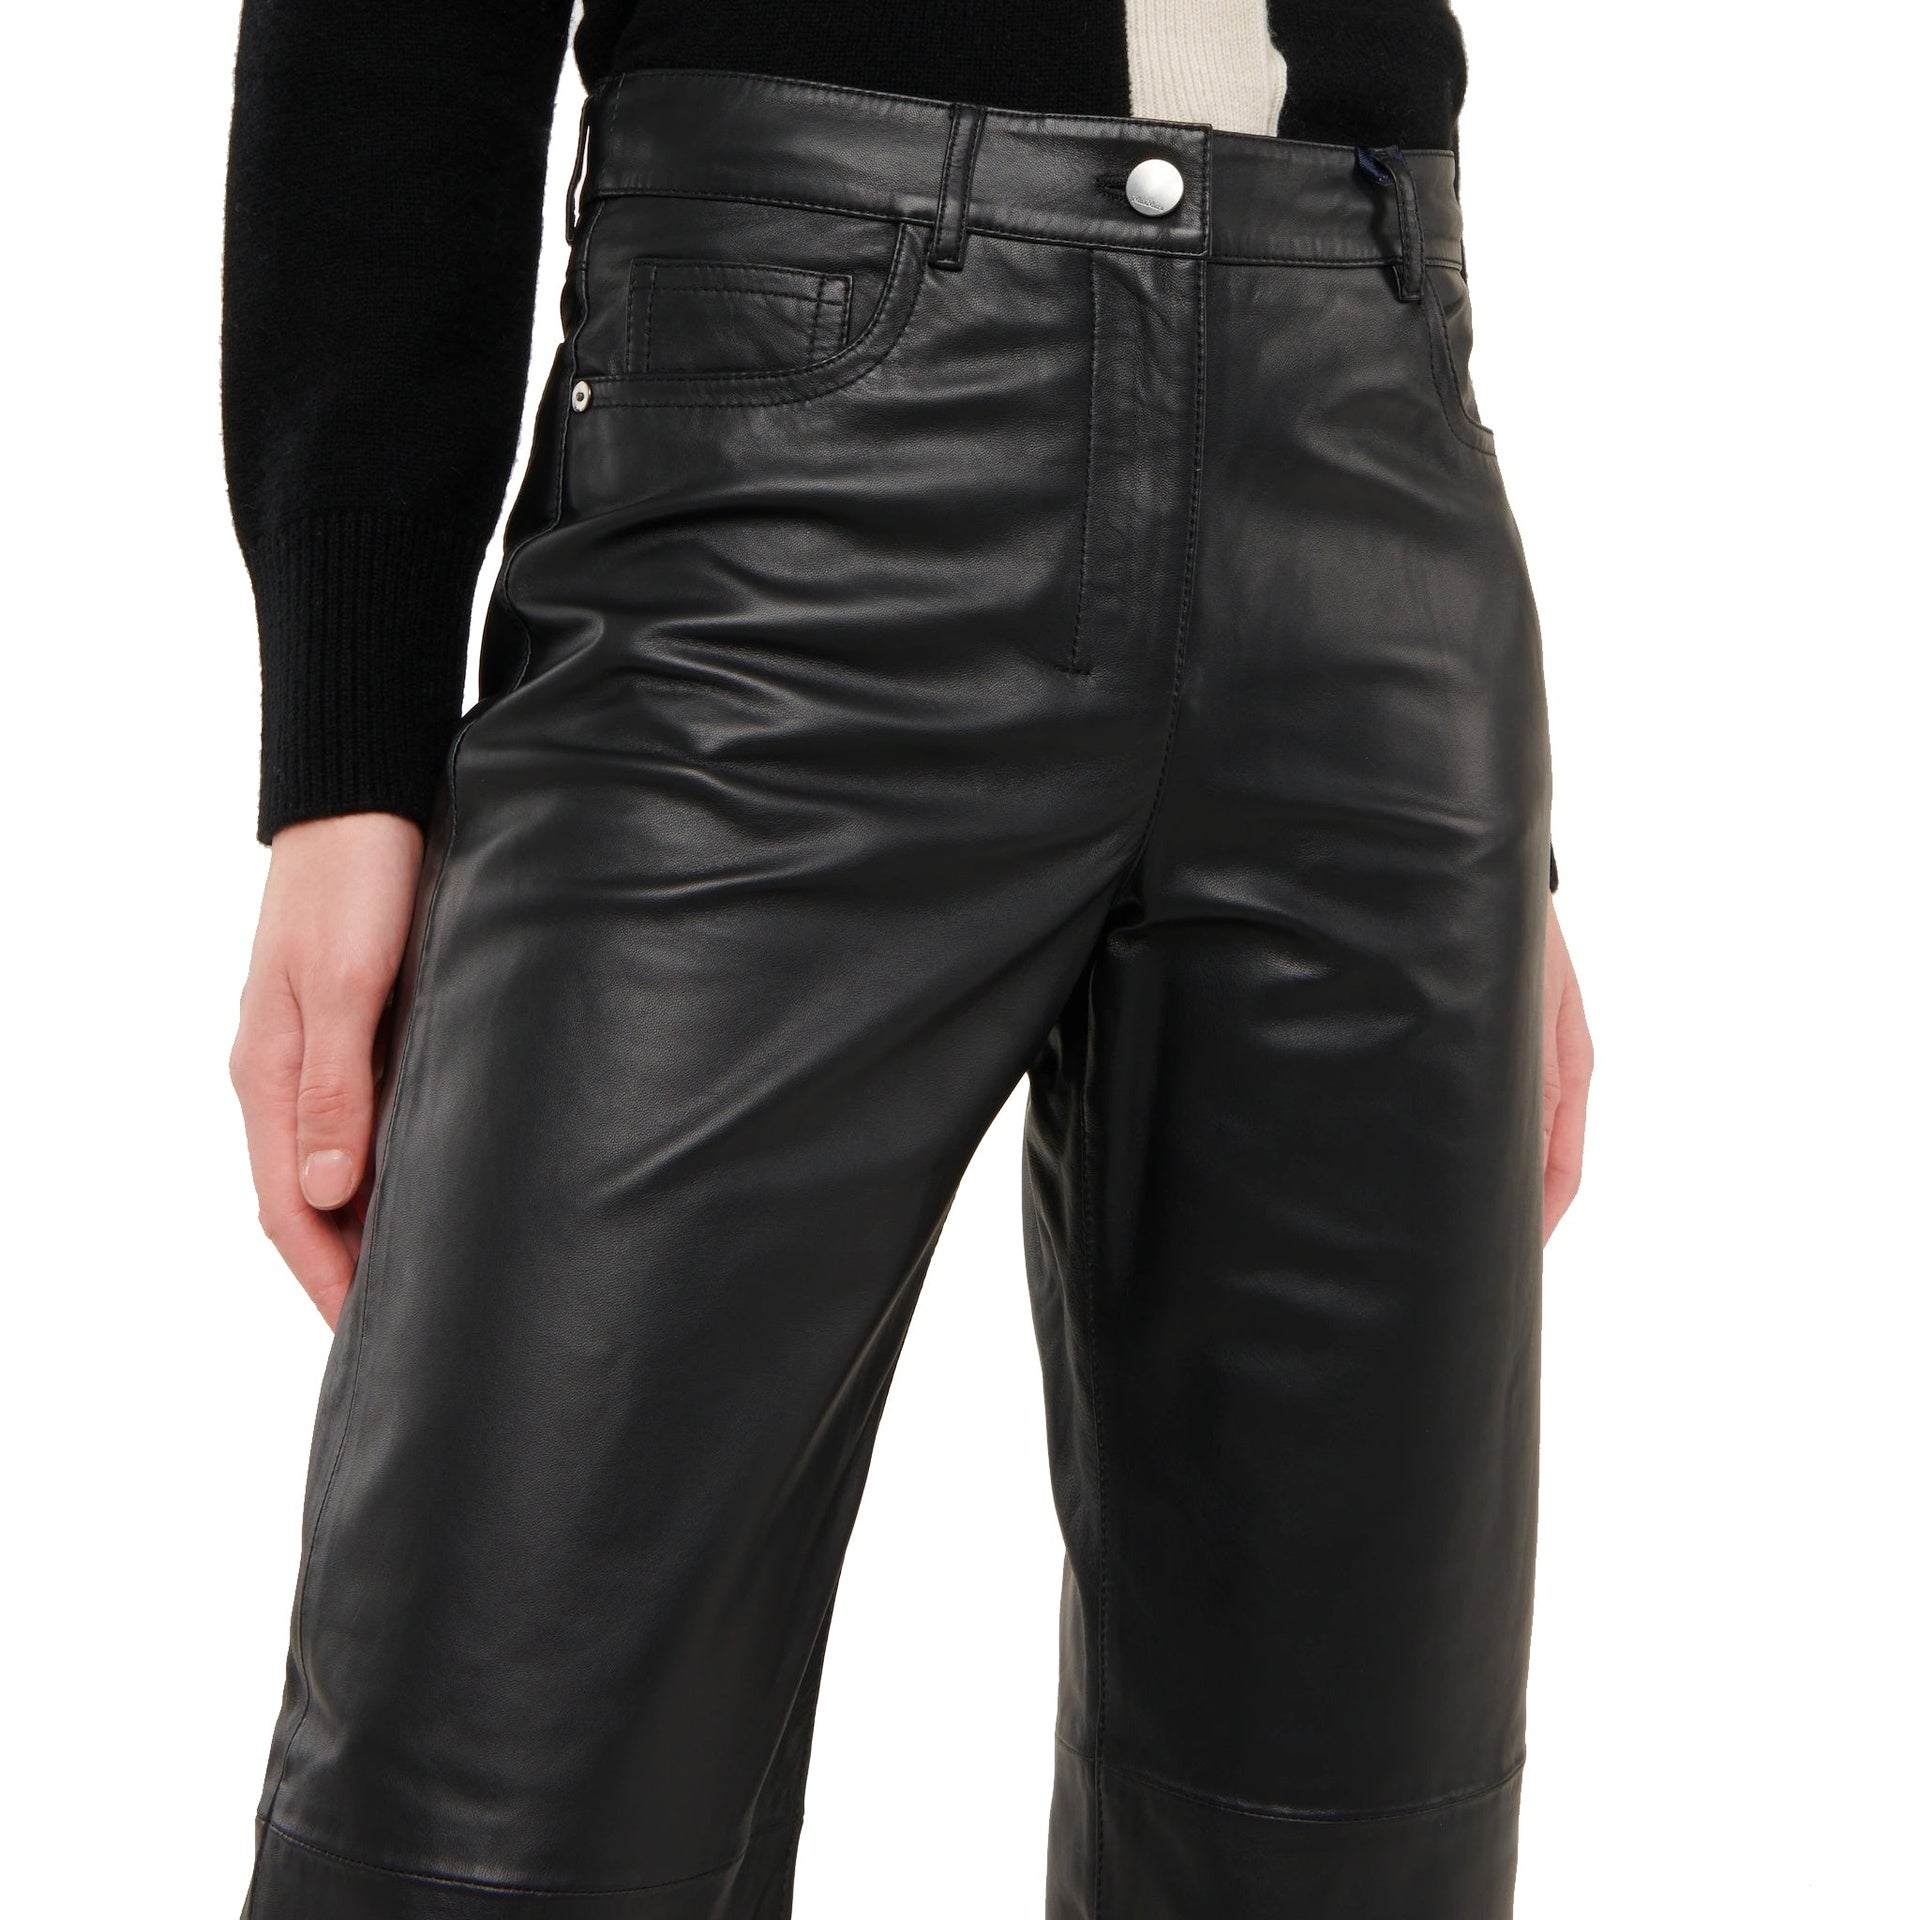 S-MAX-MARA-OUTLET-SALE-s-Max-Mara-Liana-Leather-Pants-Hosen-ARCHIVE-COLLECTION-4.jpg